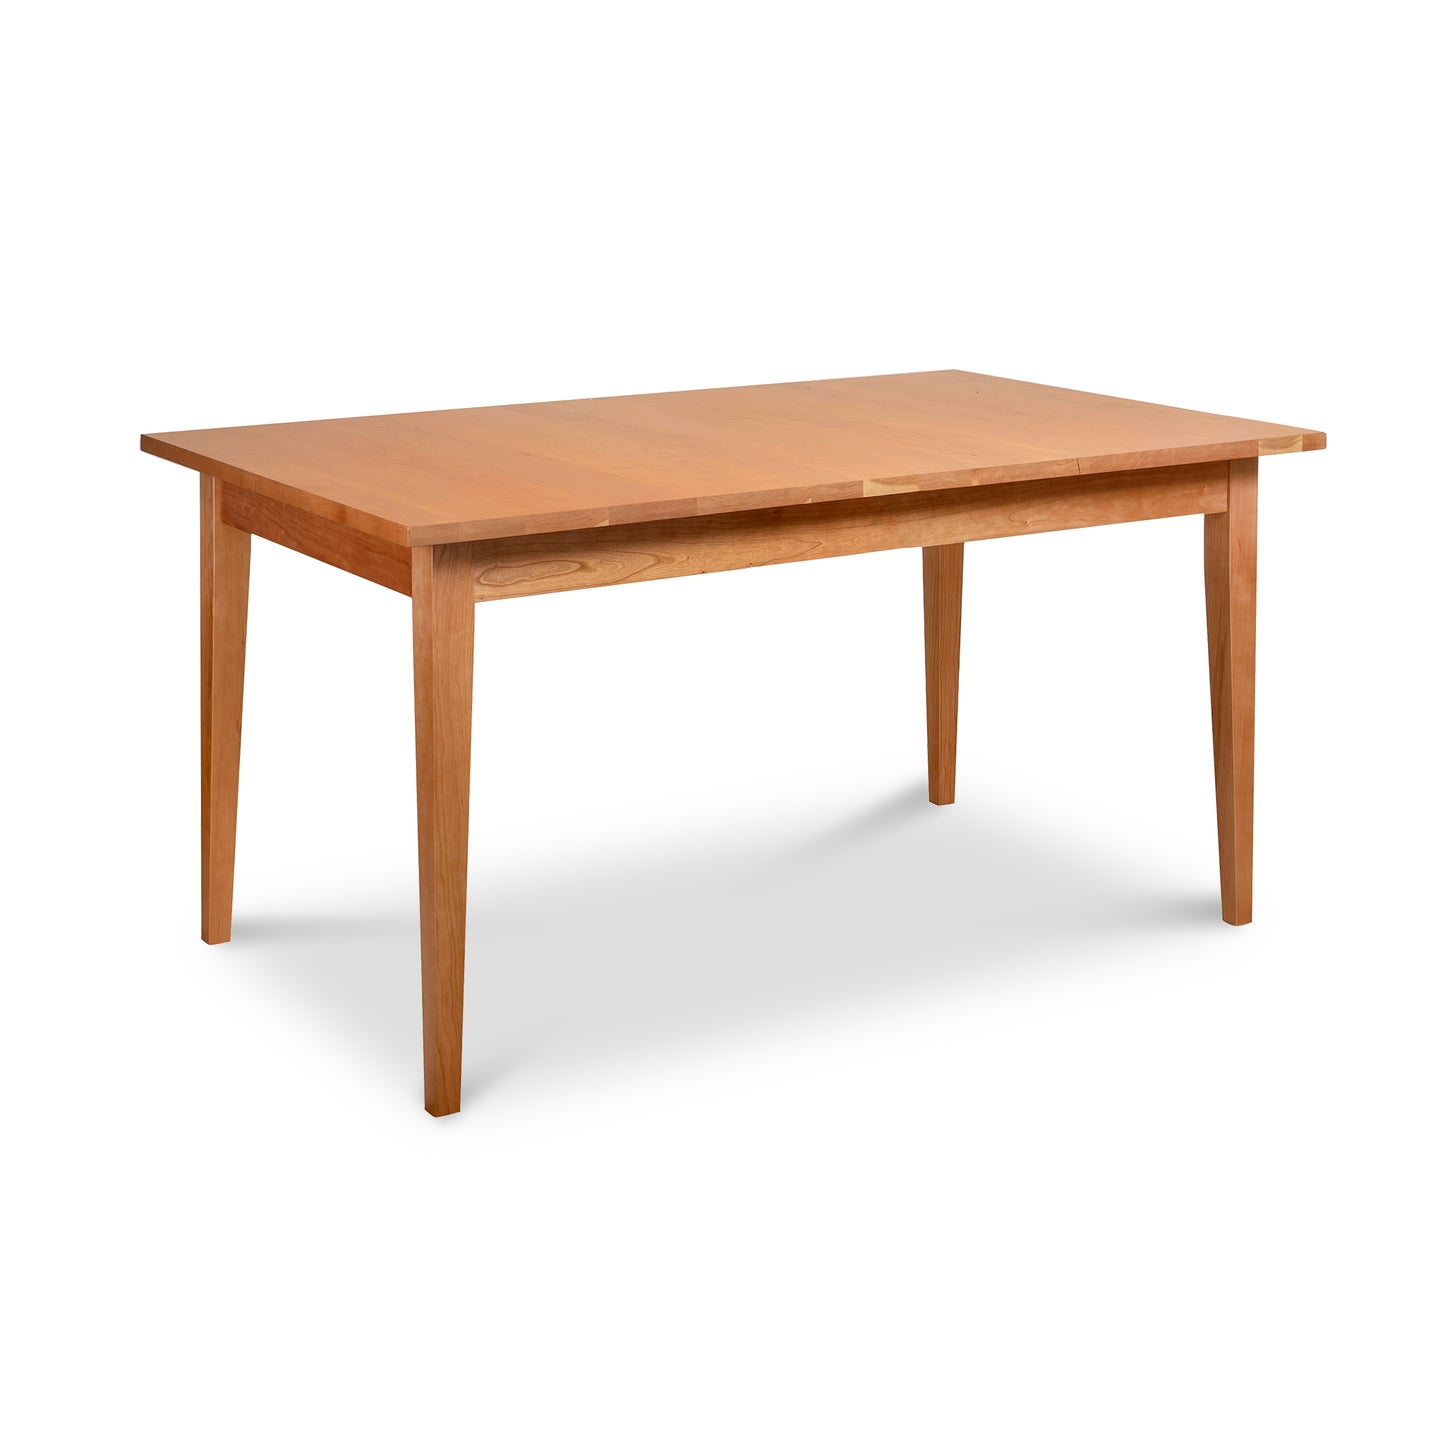 A Lyndon Furniture Classic Shaker 60" Solid Top Dining Table - Ready to Ship with legs.